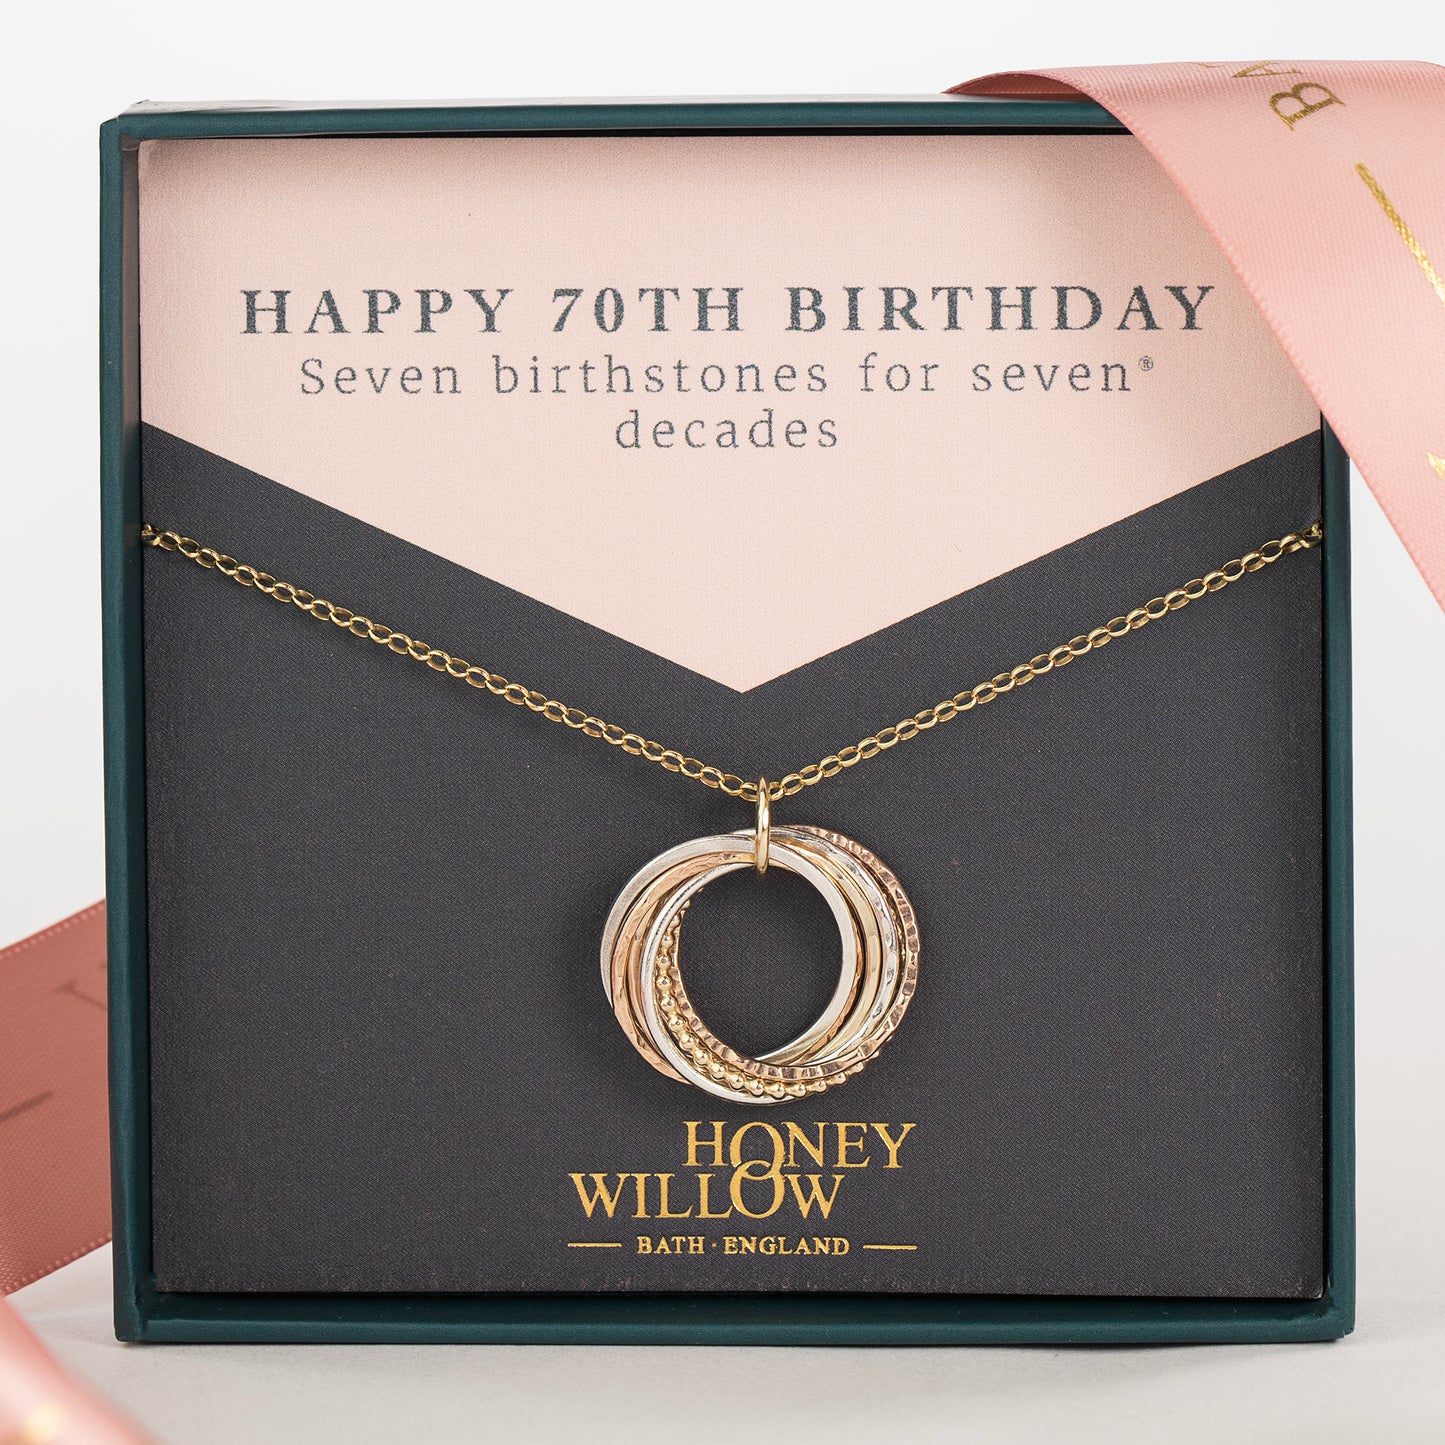 70th Birthday Necklace - The Original 7 Links for 7 Decades Necklace - 9kt Gold, Rose Gold & Silver